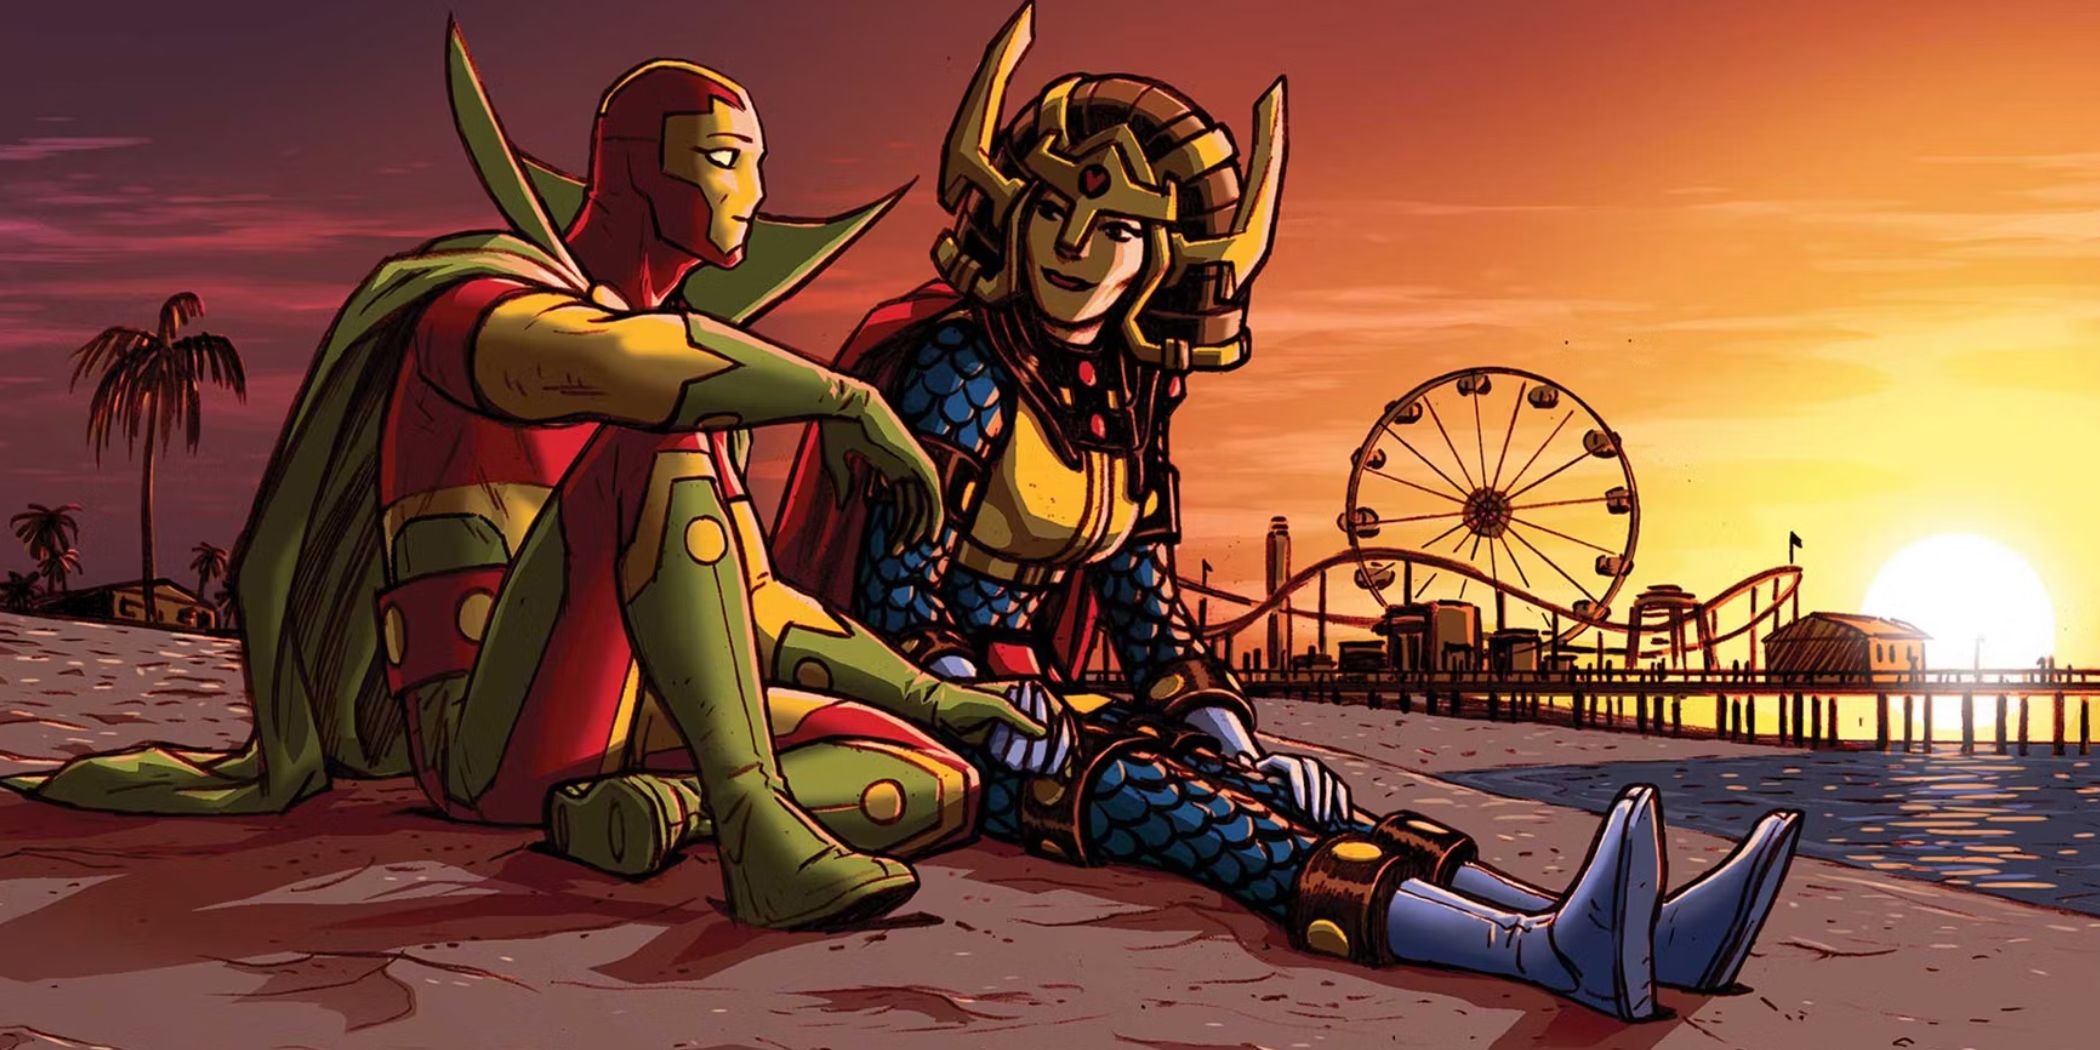 DC's Mister Miracle and Big Barda sitting on a beach talking with an amusement park with ferris wheel and roller coaster in the background while the sun sets